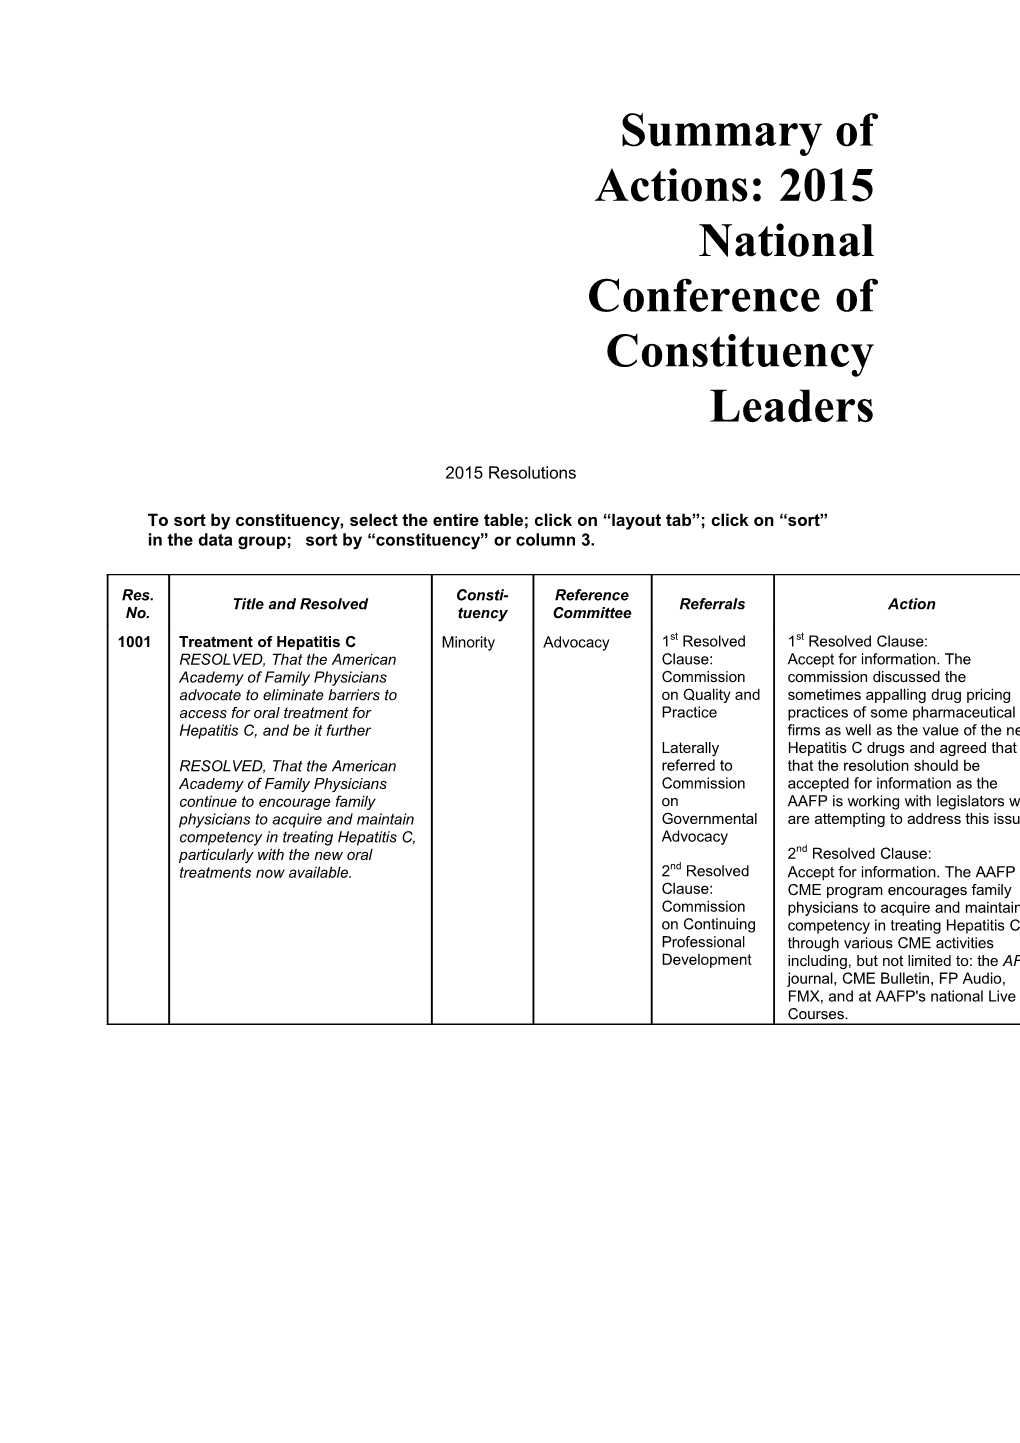 Summary of Actions: 2015 National Conference of Constituency Leaders